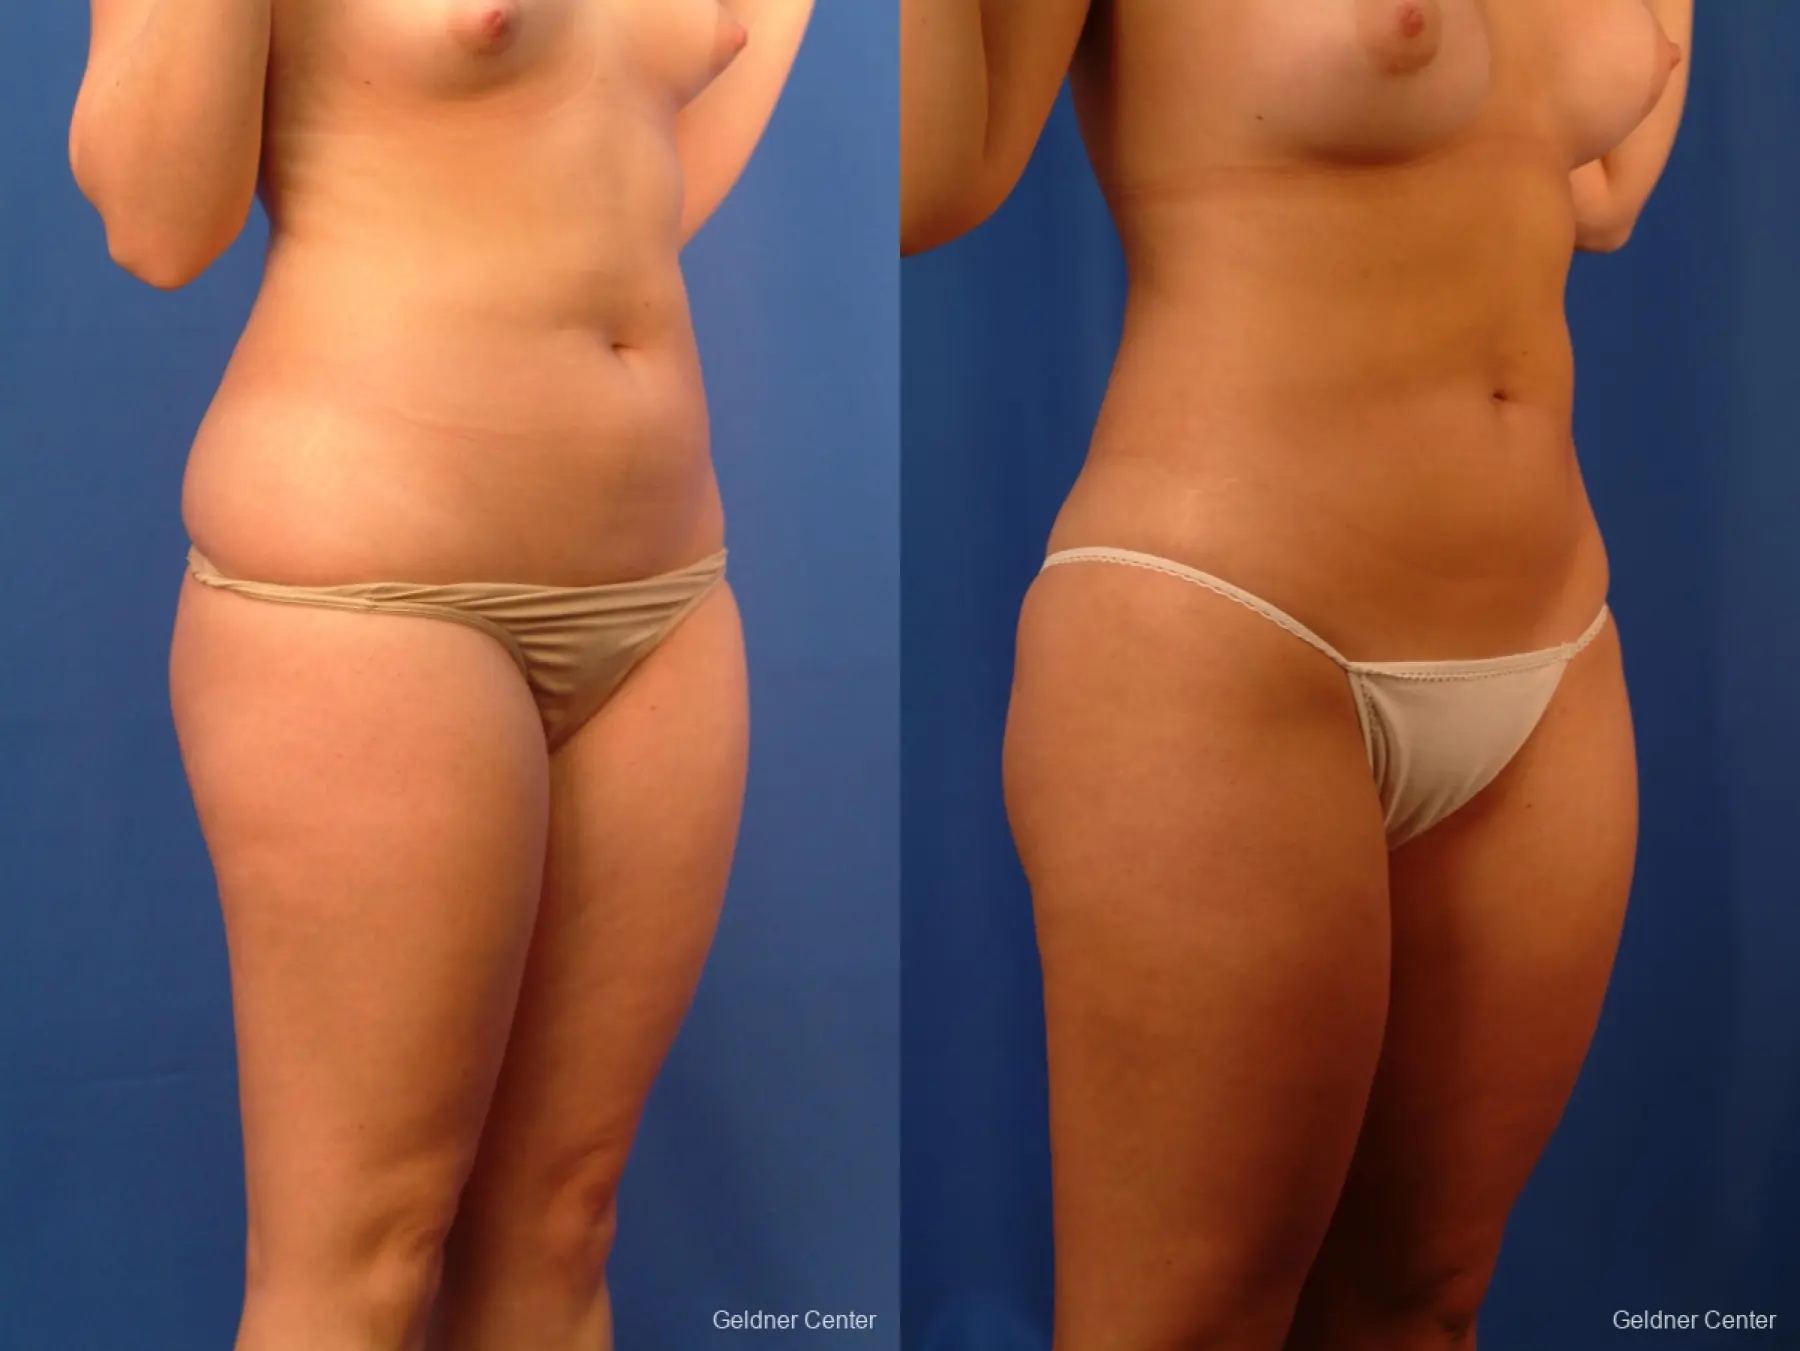 Vaser lipo patient 2516 before and after photos - Before and After 2